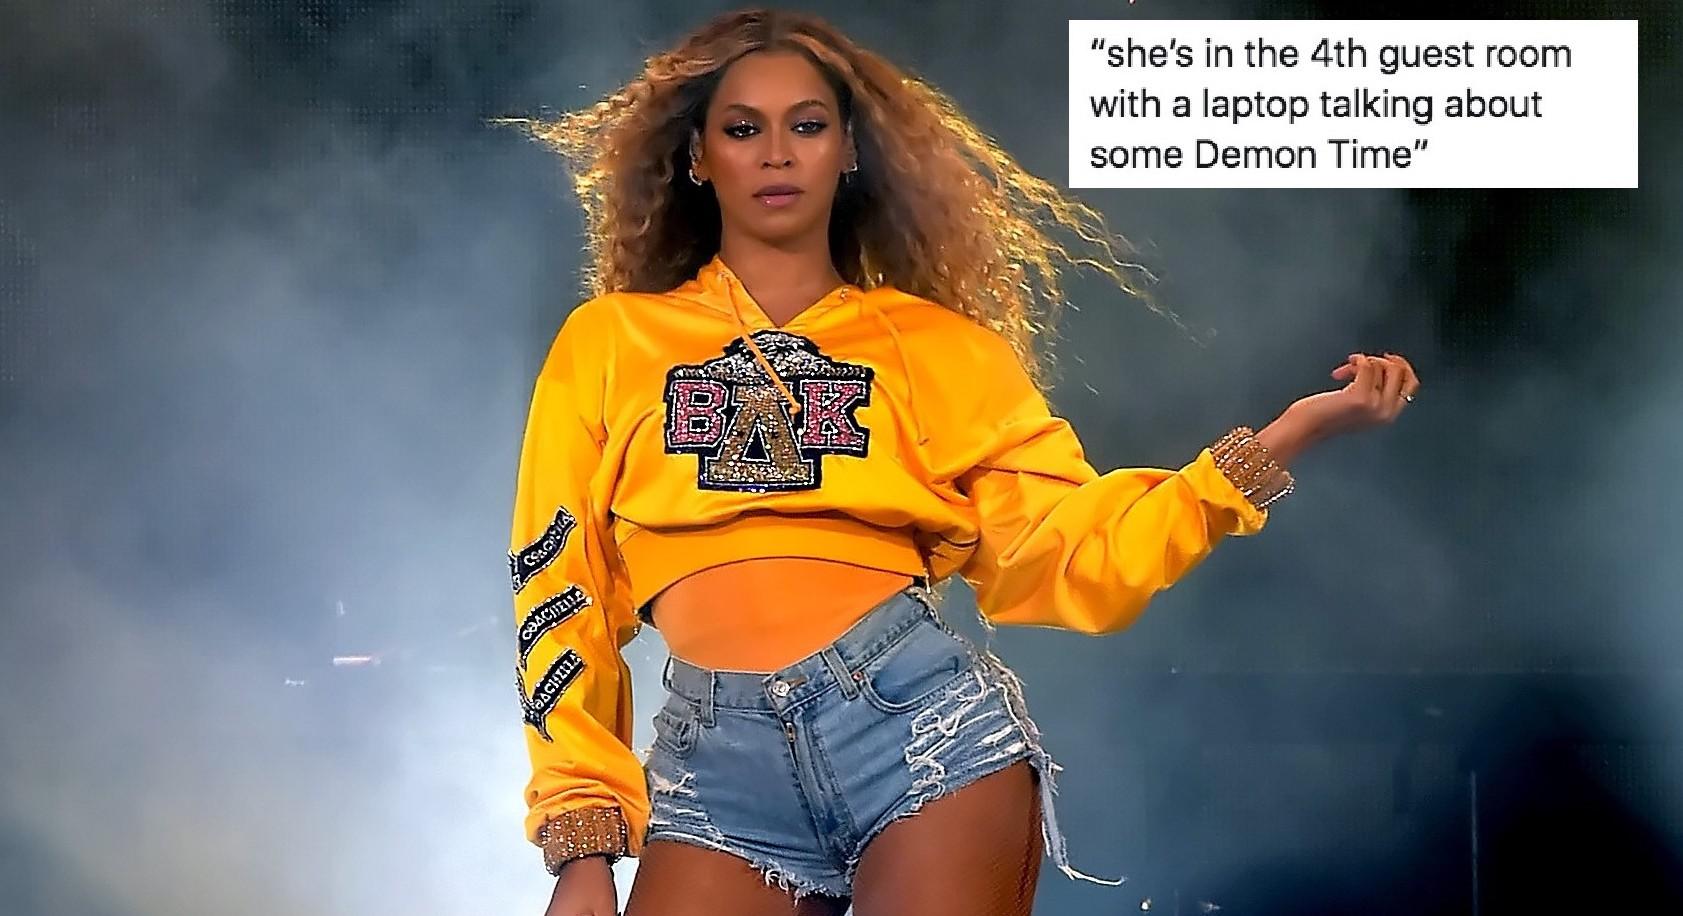 If Beyoncé Talking About “Demon Time” Has You Confused, You’re Not Alone